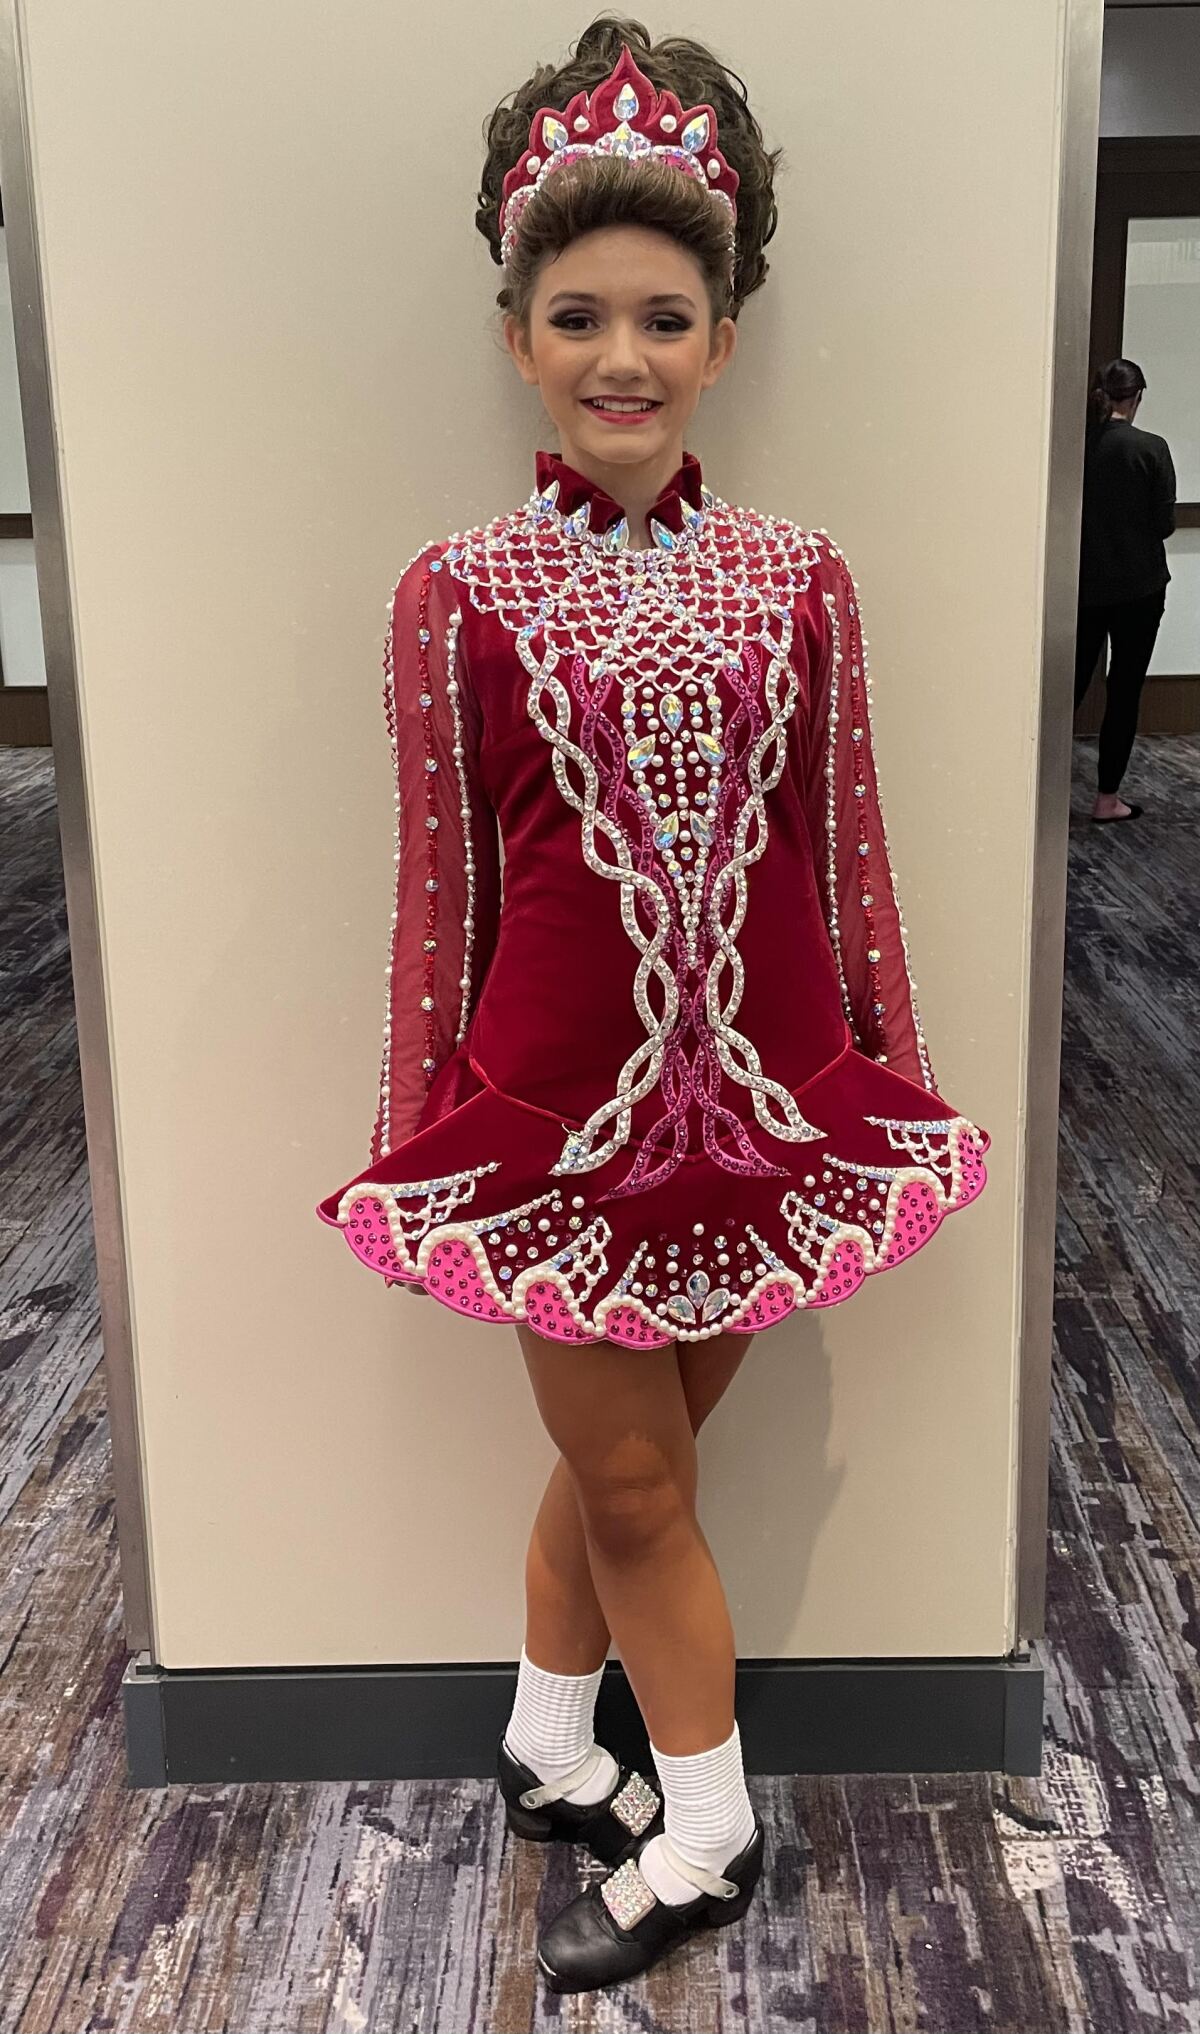 Poway 12-year-old to compete at Irish Dance World Championships in ...